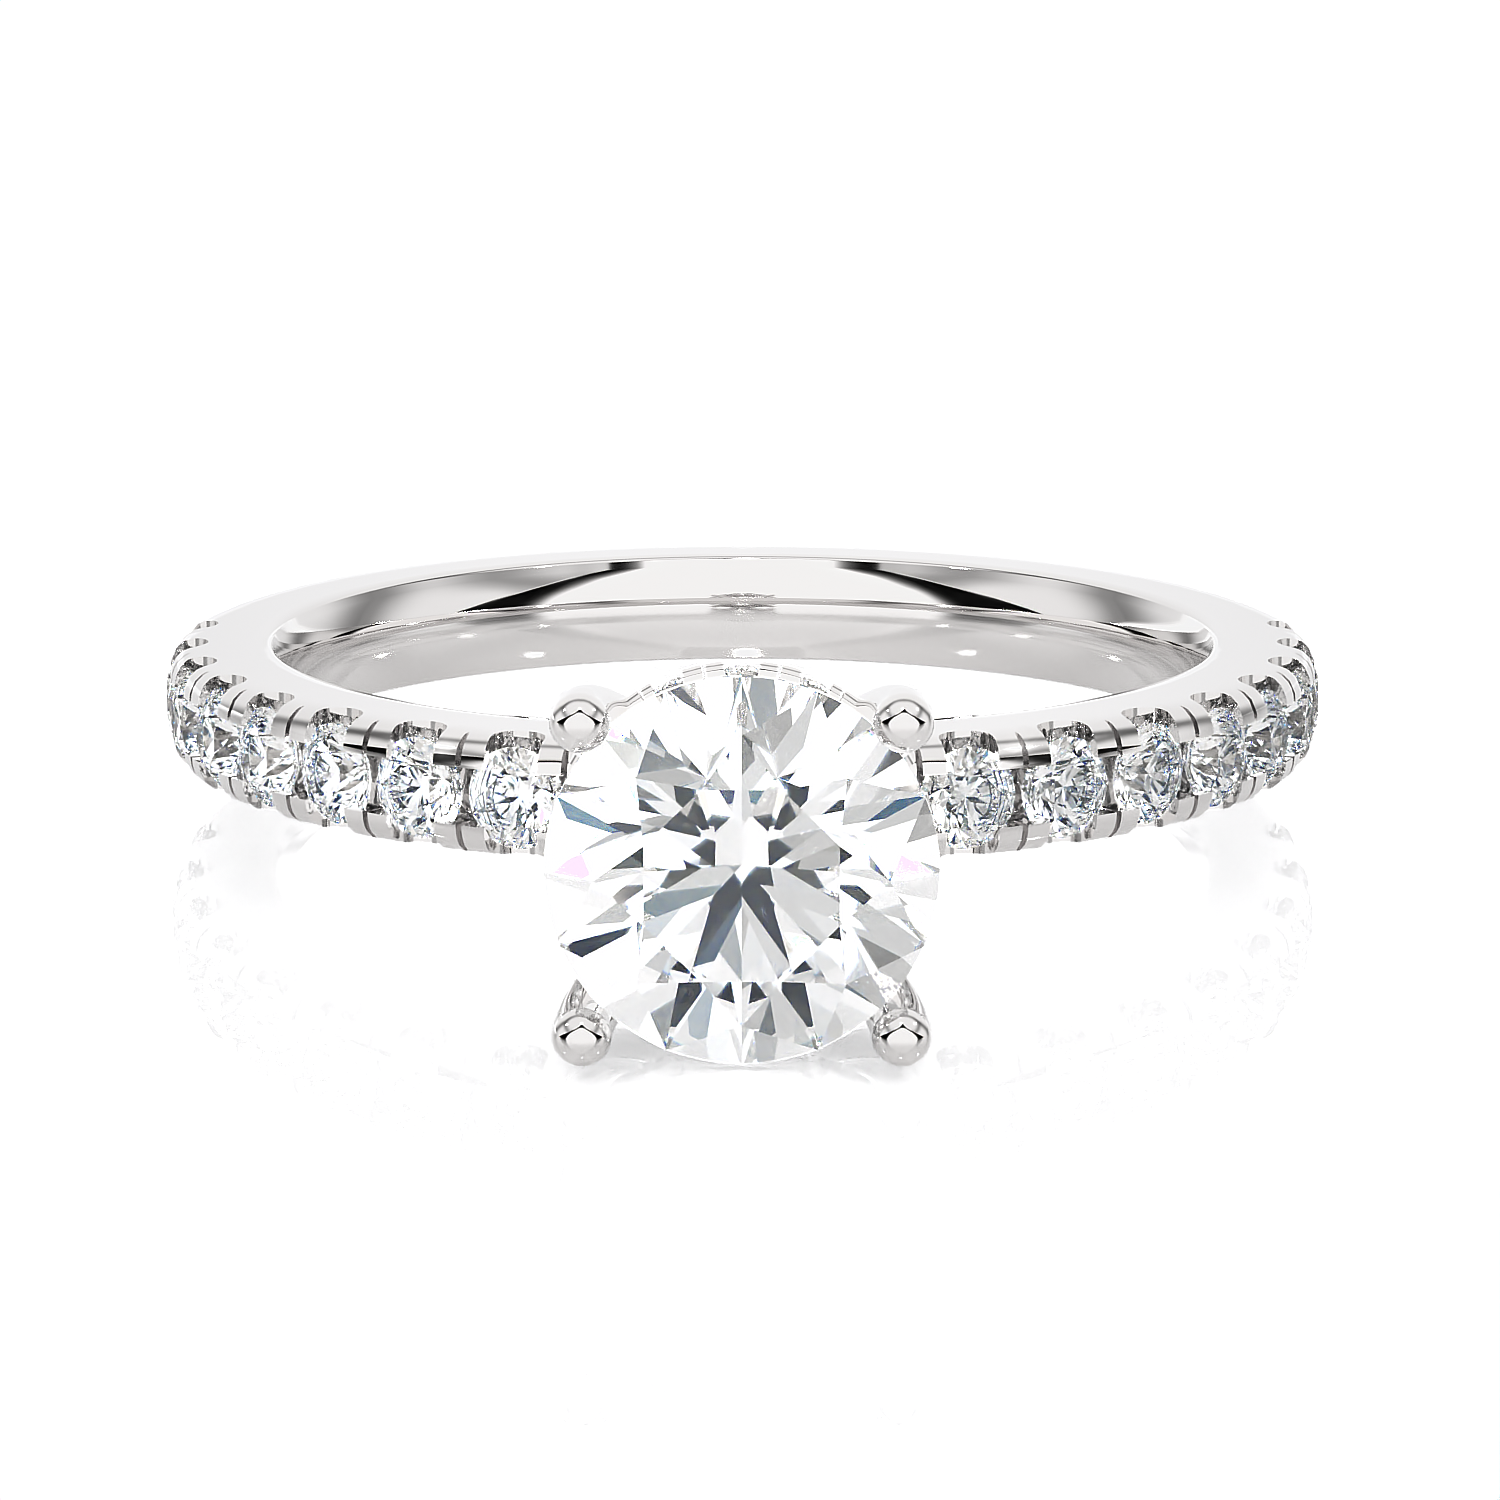 French Pave Engagement Ring